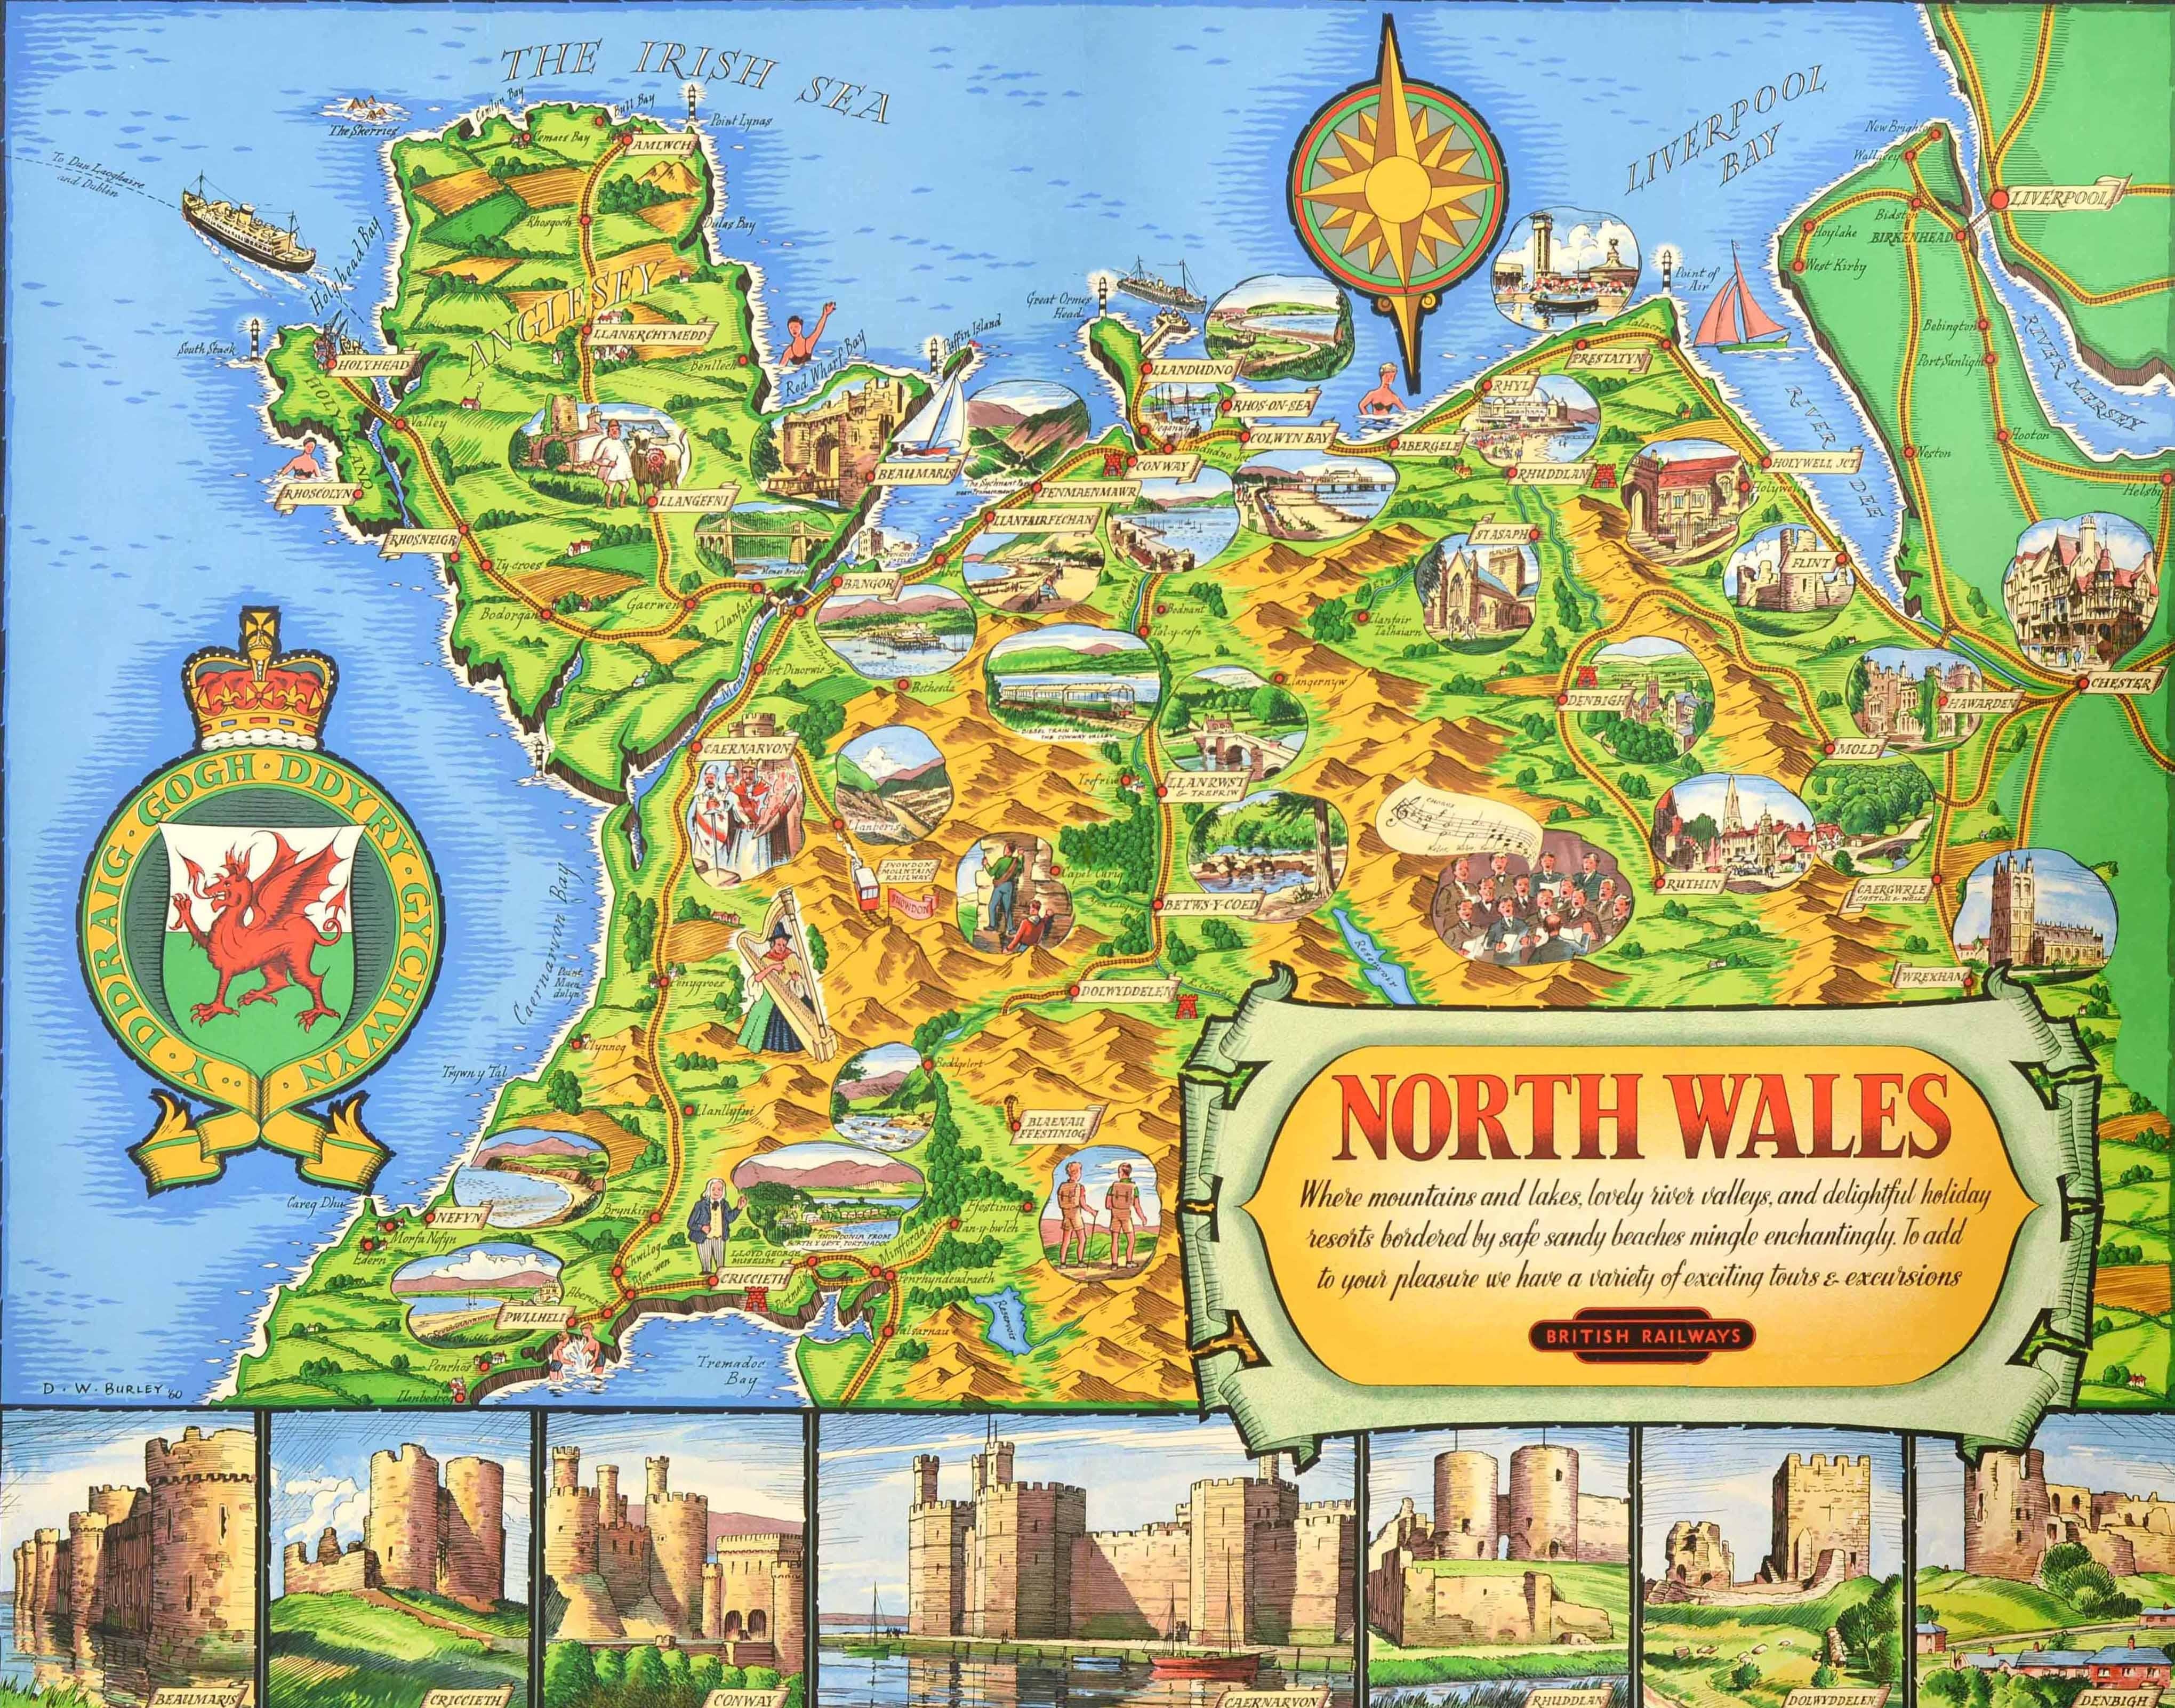 Original vintage British Railways travel map poster - North Wales where mountains and lakes, lovely river valleys, and delightful holiday resorts bordered by safe sandy beaches mingle enchantingly. To add to your pleasure we have a variety of